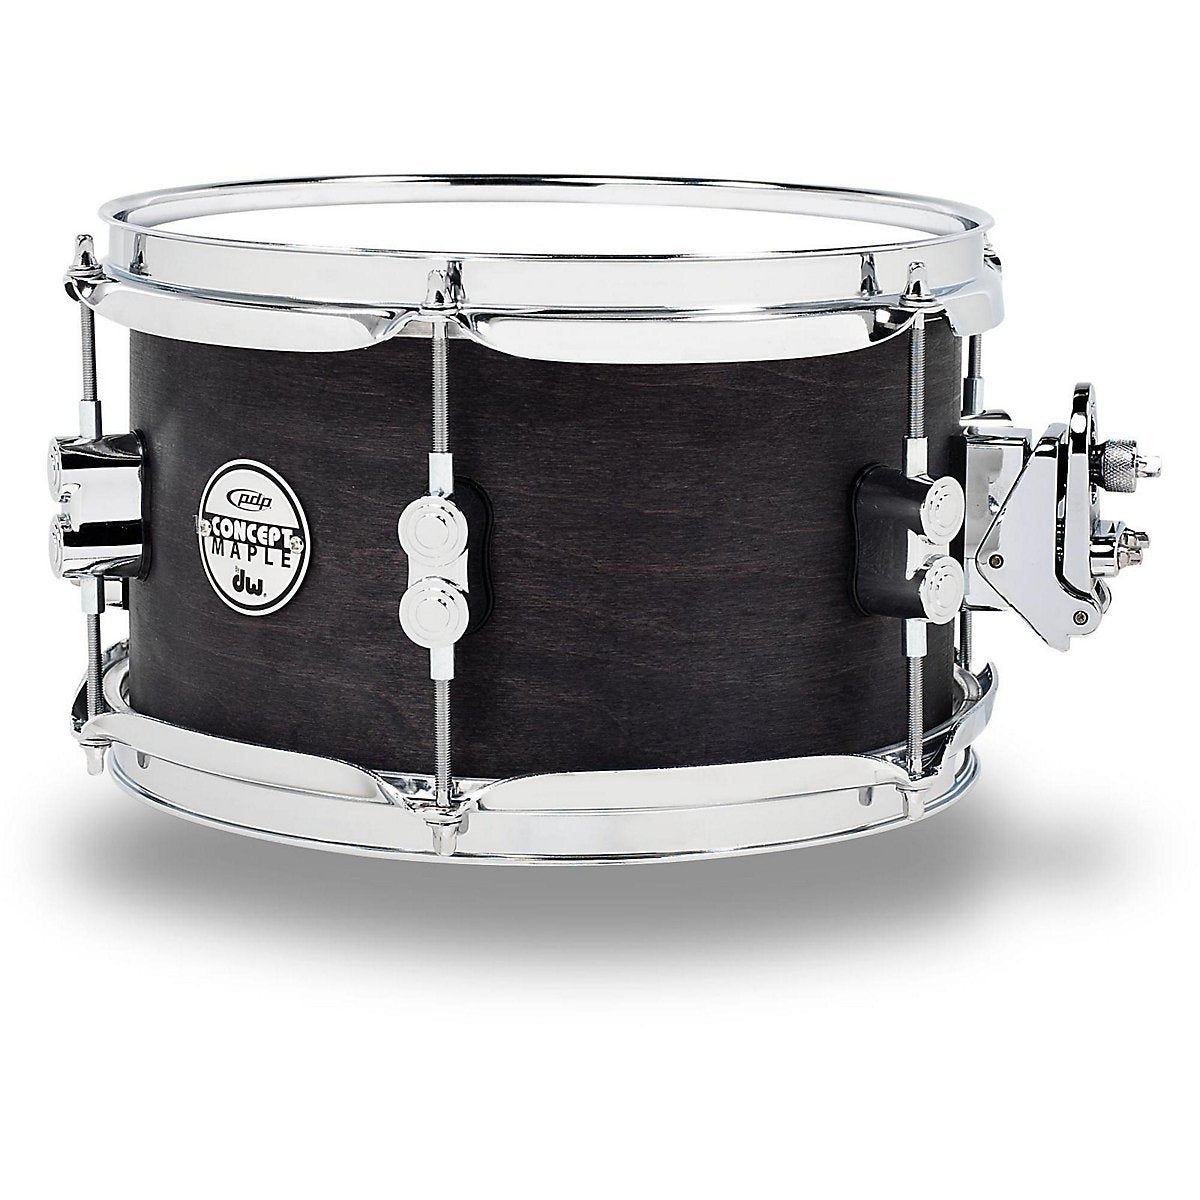 PDP 6x10" Black Wax Maple Snare